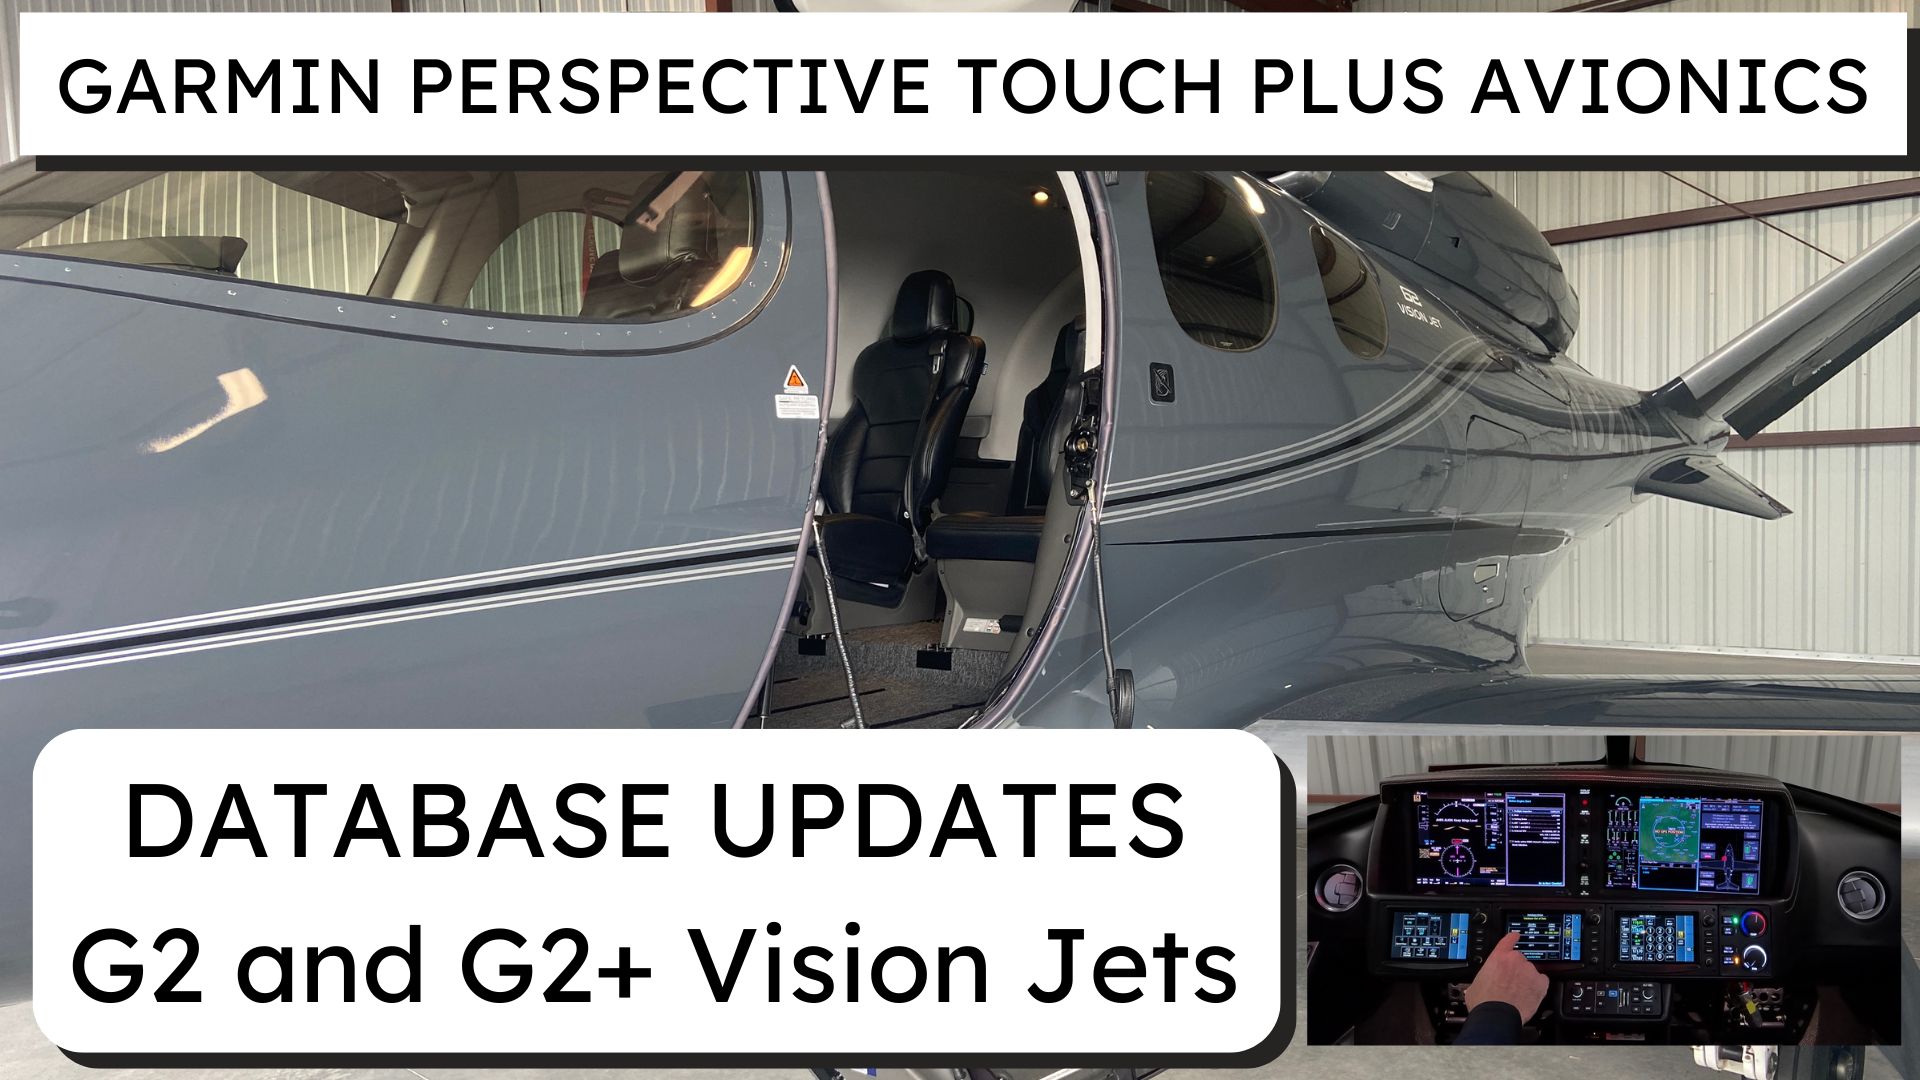 Cirrus G2 and G2+ Avionics Database Update Process (not for G1 jets…)